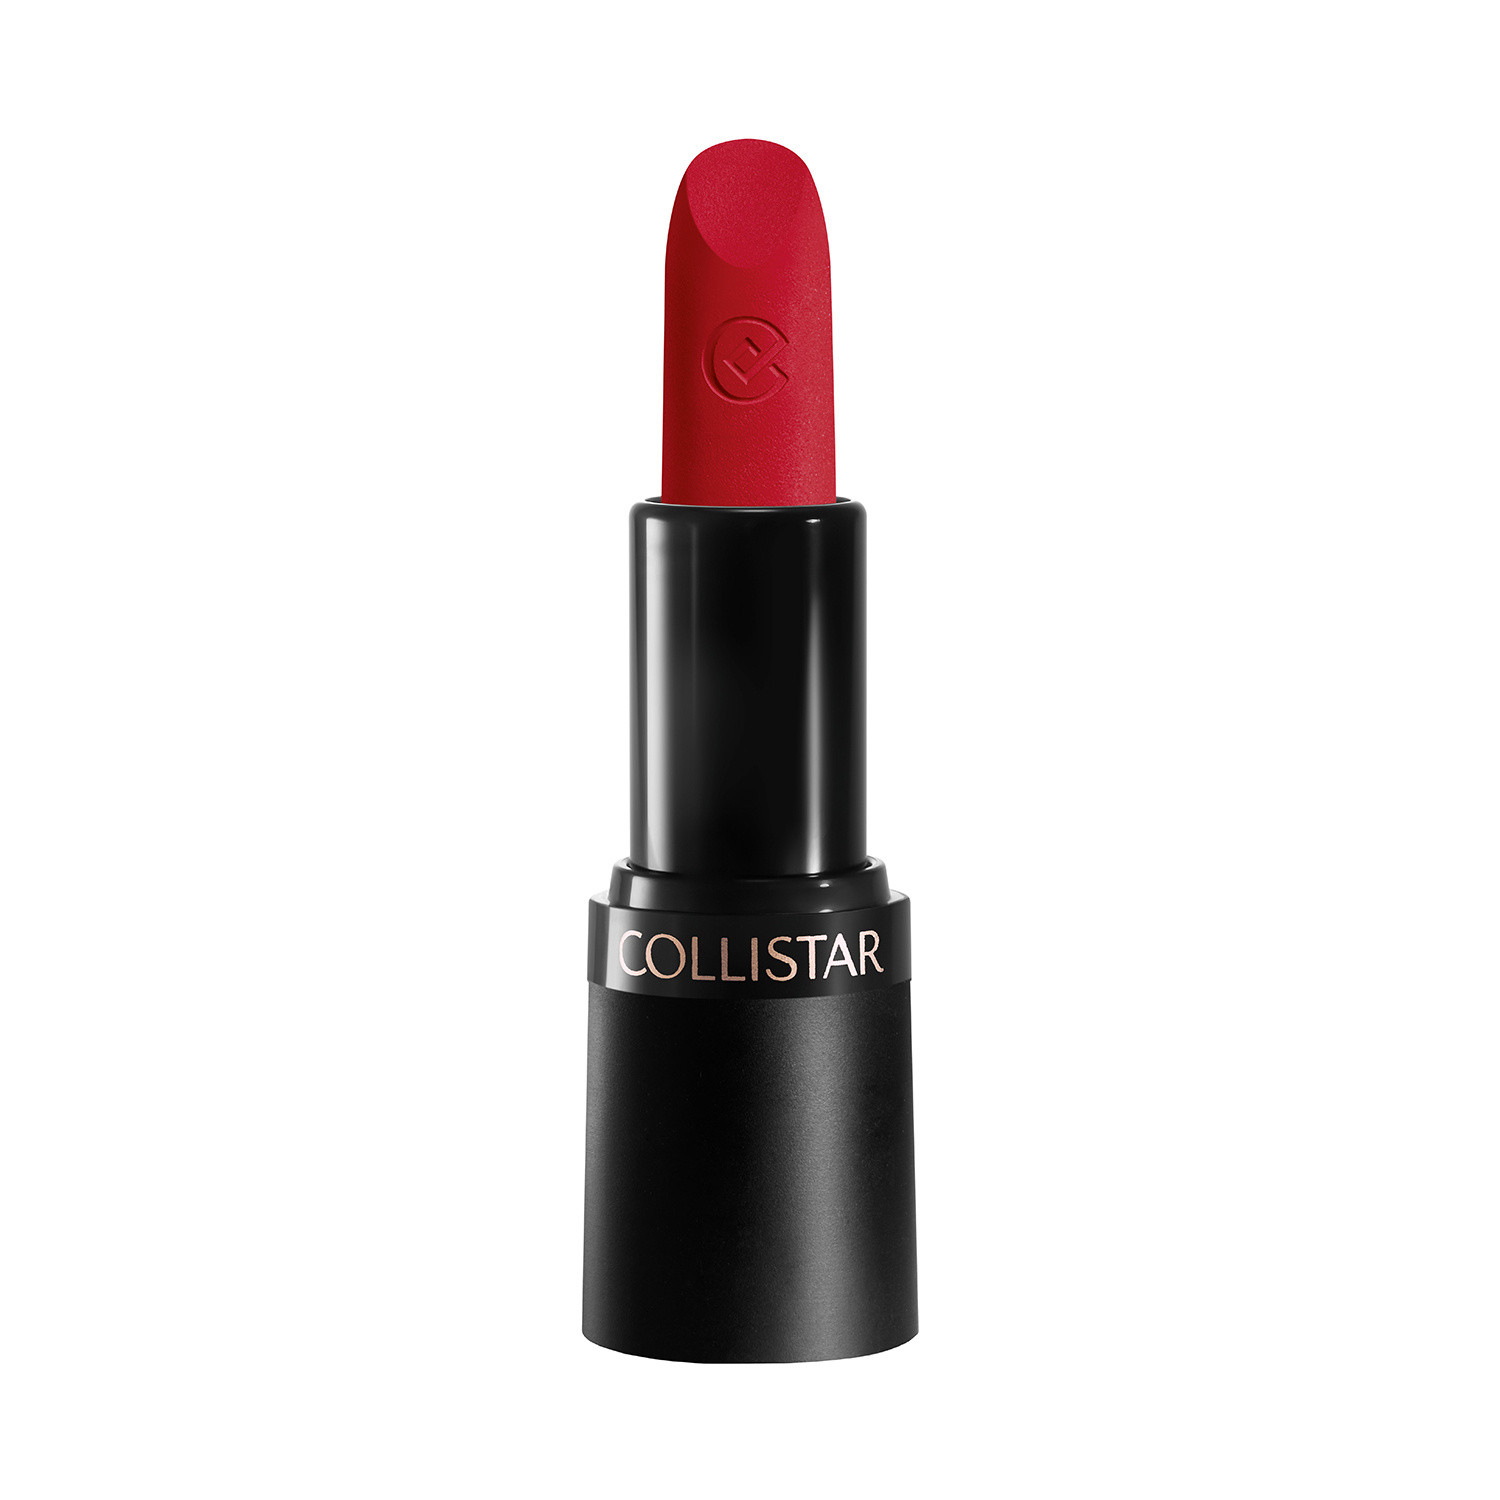 Collistar - Pure matte lipstick - 111 Rosso Milano, Strawberry Red, large image number 0